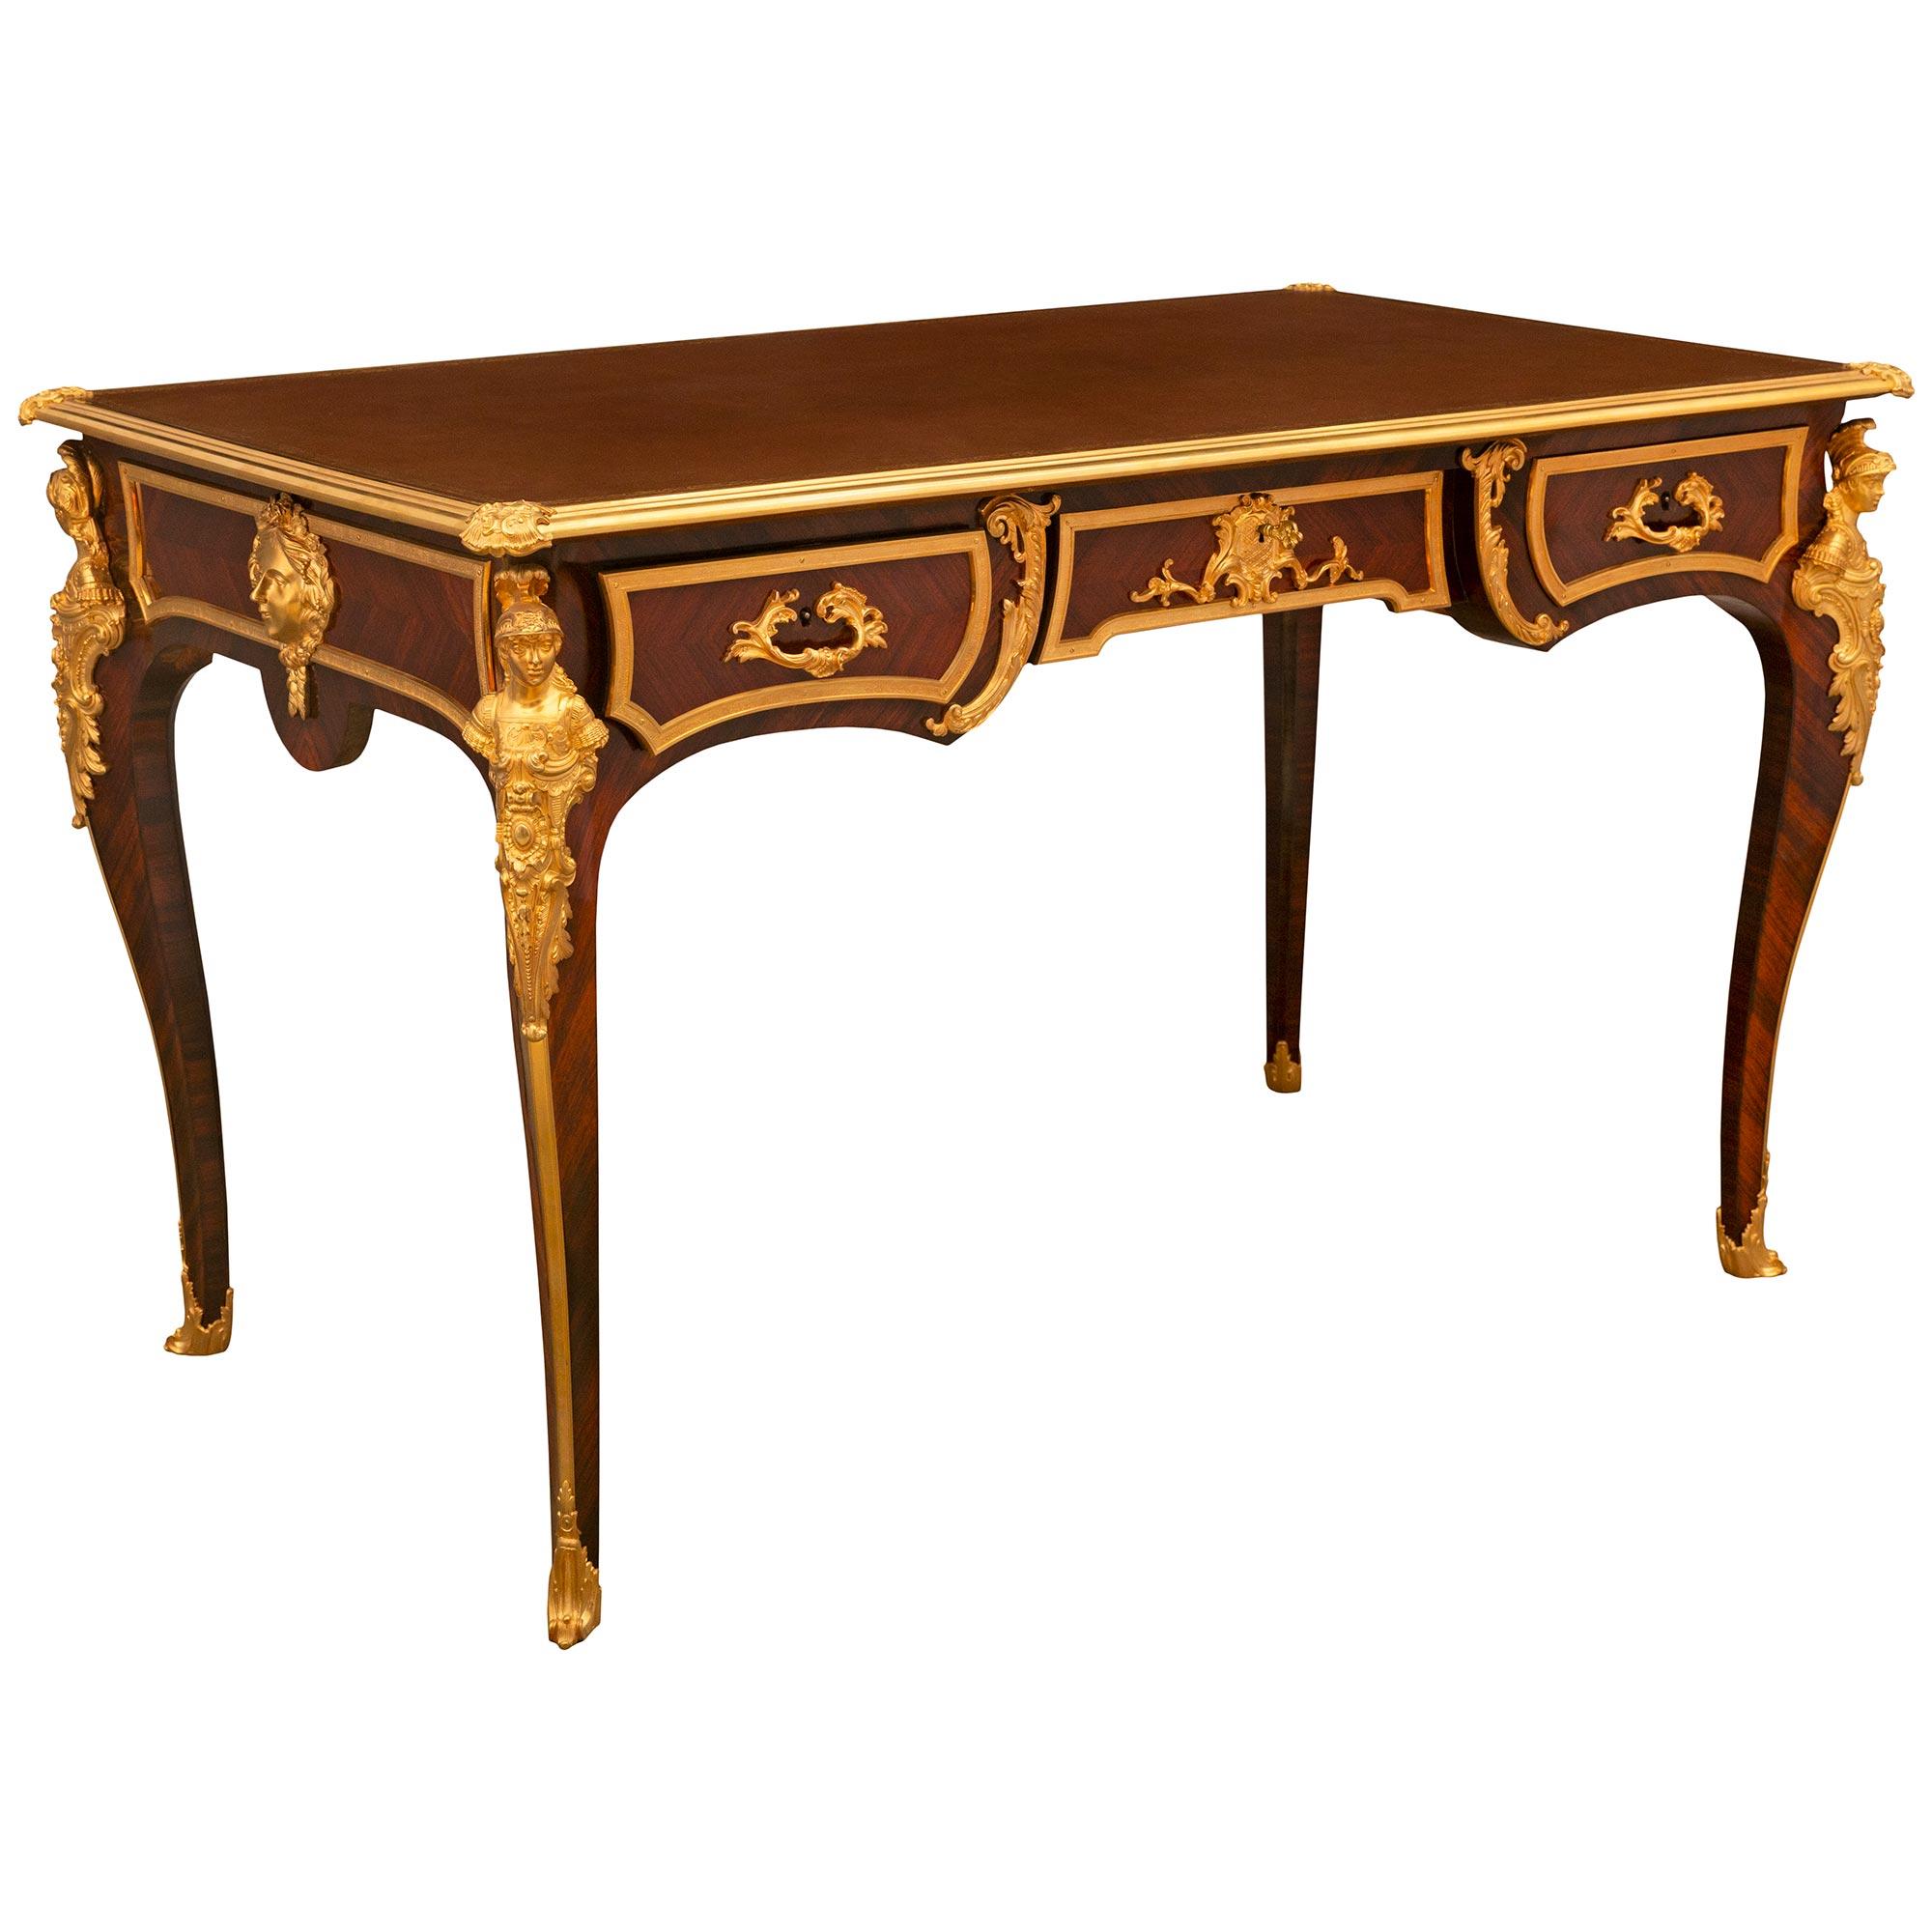 A French 19th century Louis XV st. Kingwood and Ormolu Bureau Plat In Good Condition For Sale In West Palm Beach, FL